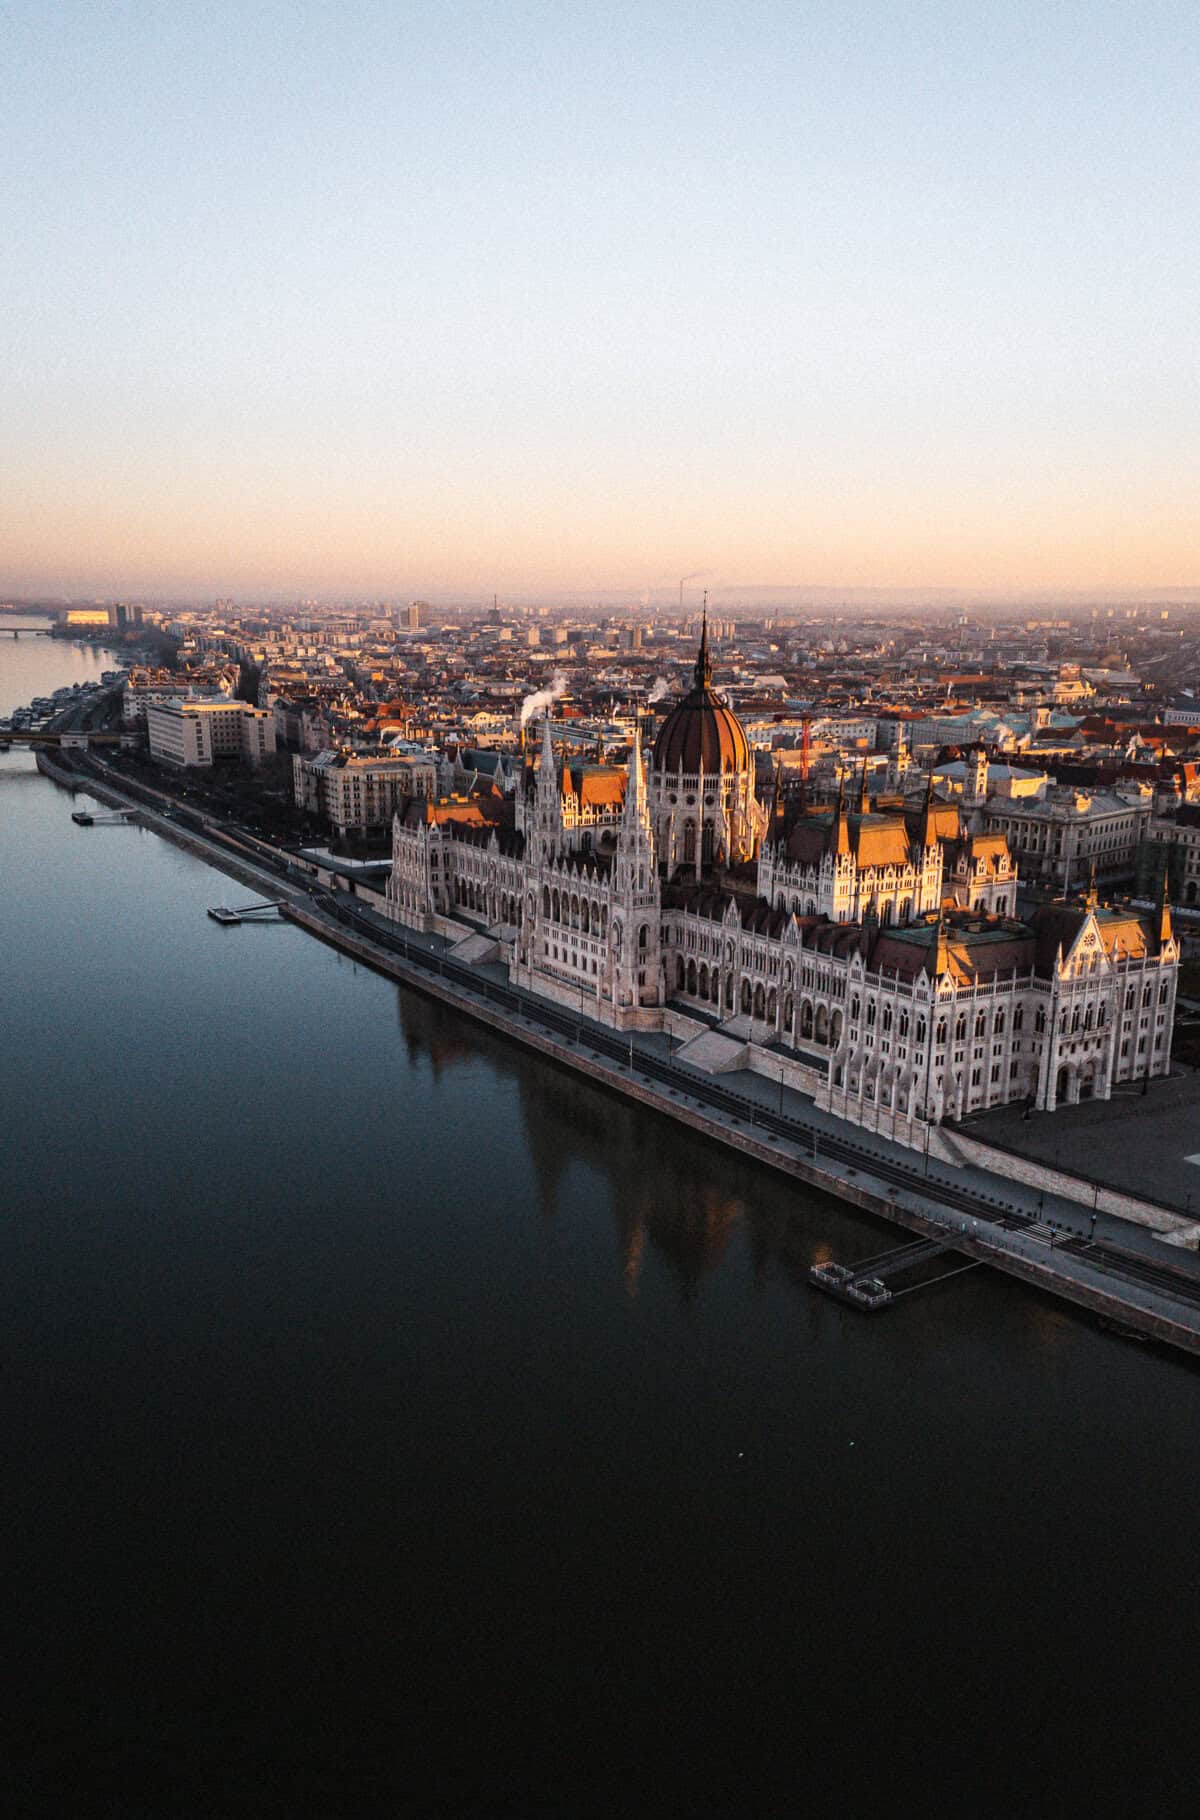 Aerial view of Budapest at sunset, featuring Buda Castle and the surrounding landscape with the Danube River in the foreground.